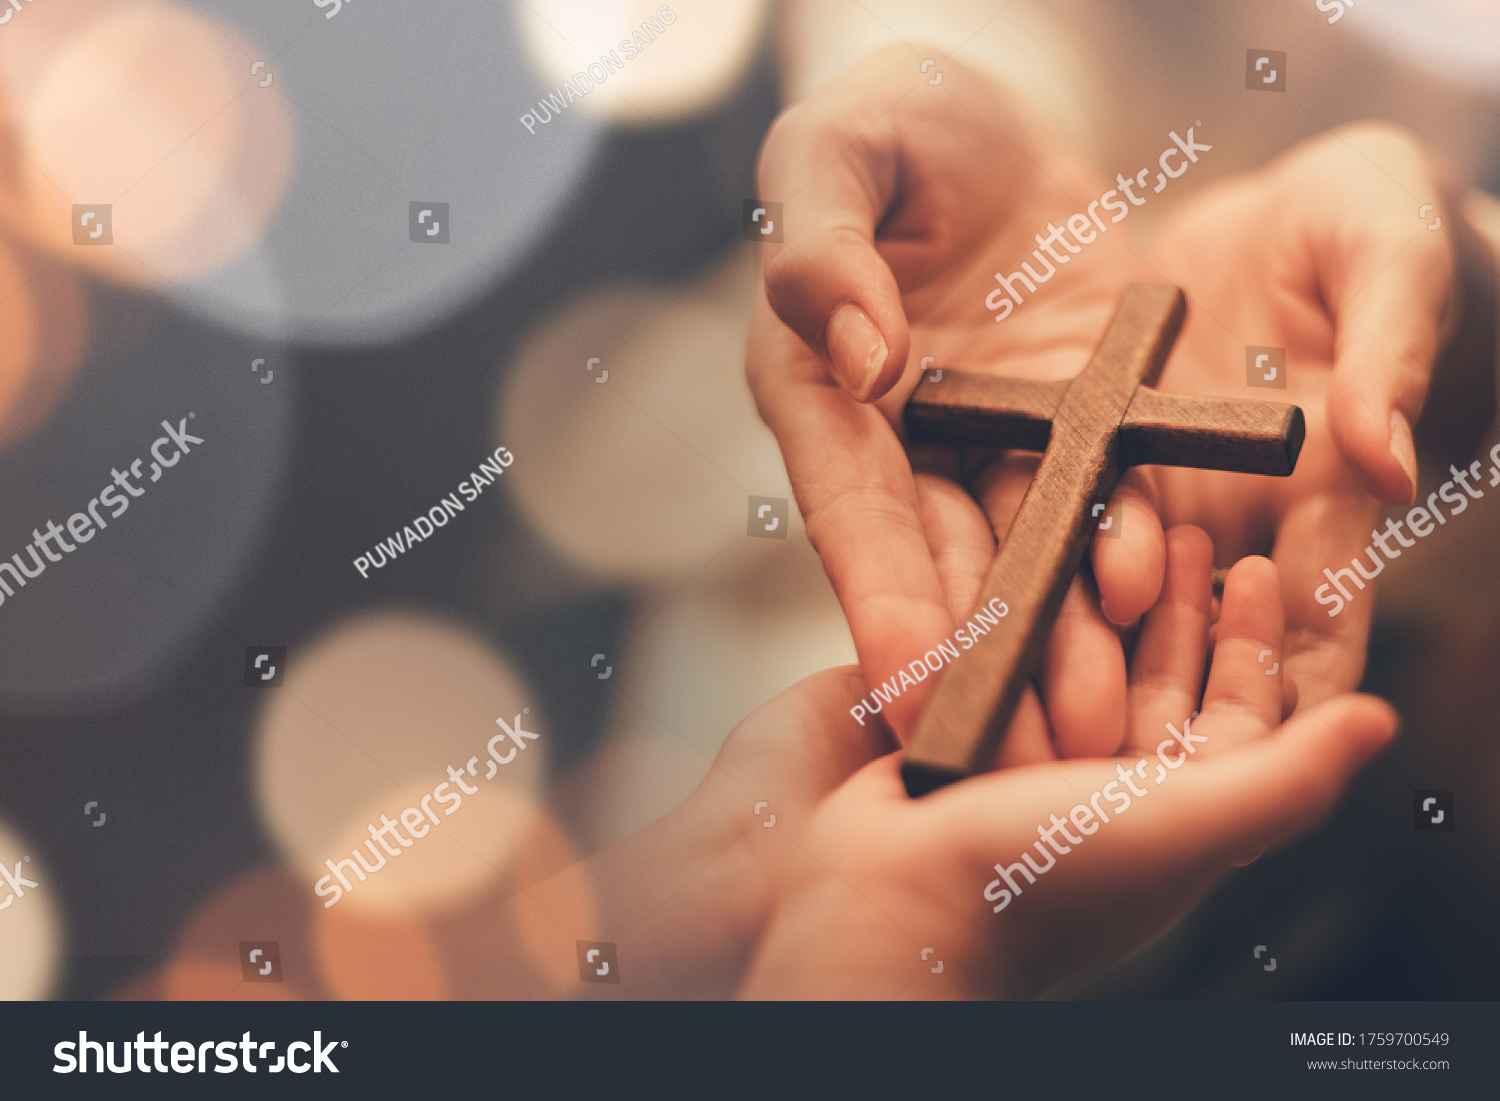 Woman's hand with cross .Concept of hope, faith, christianity, religion, church online. #1759700549